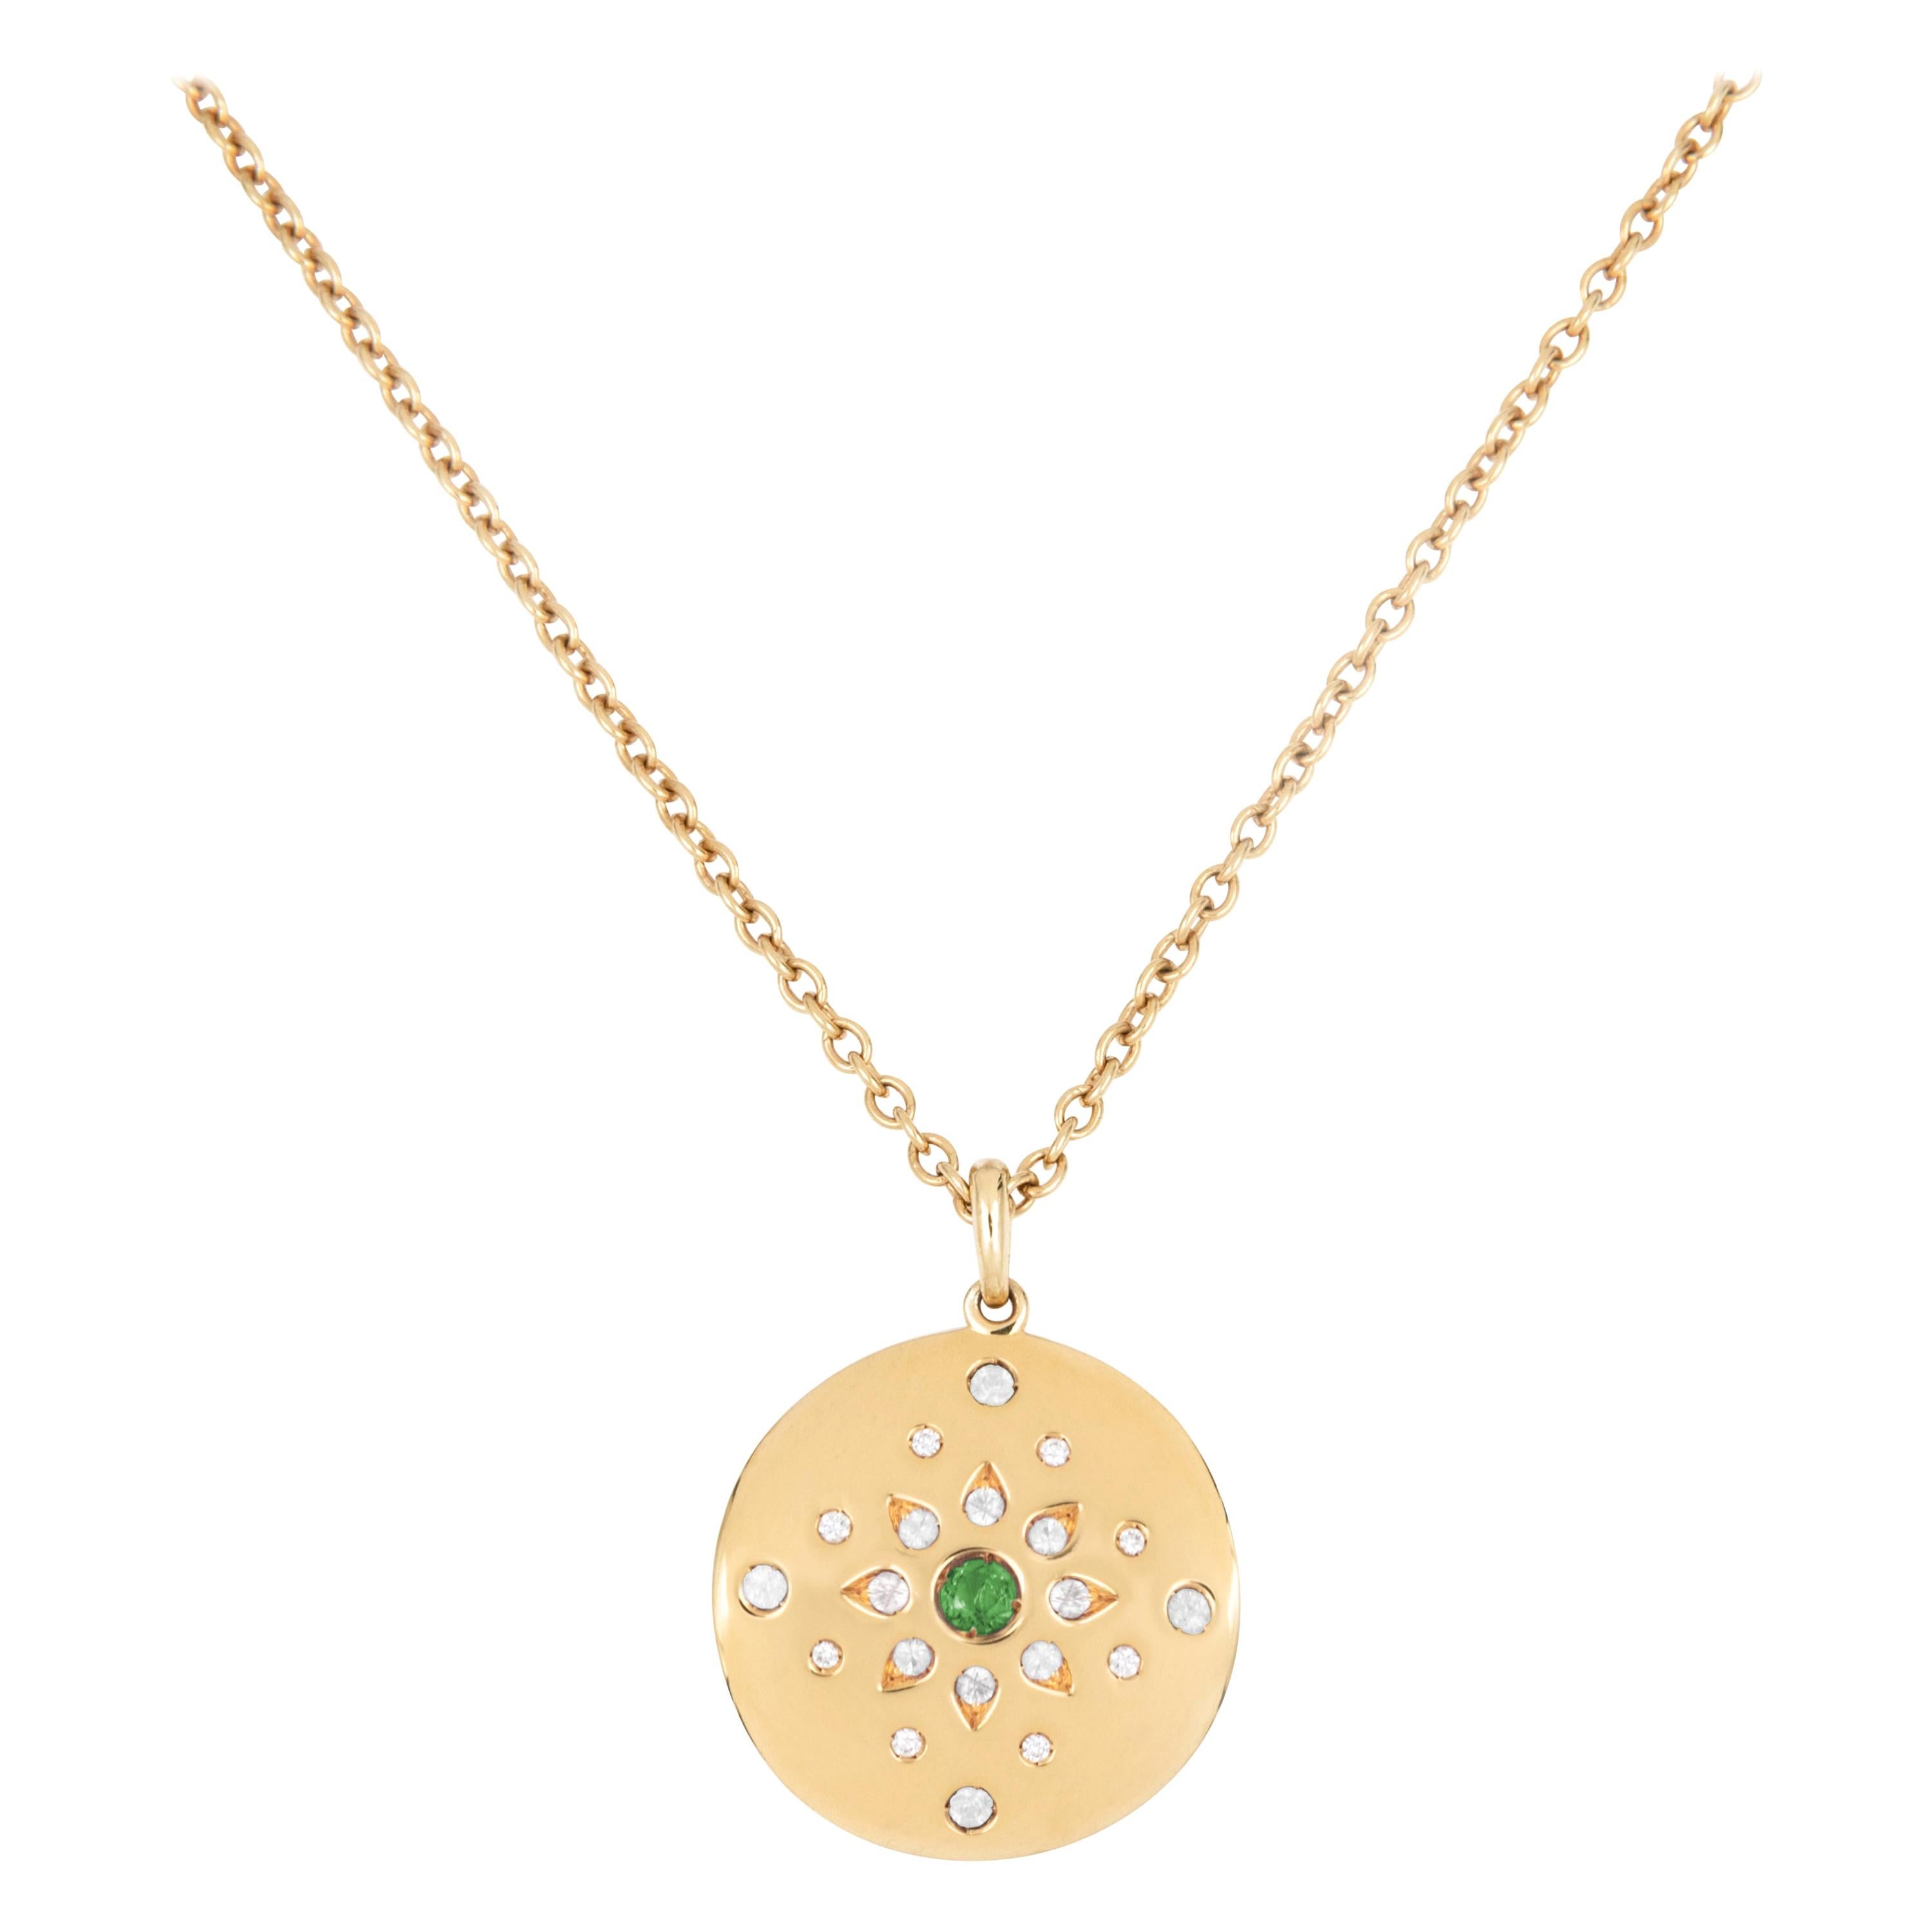 Set composed of an 18 karat yellow gold pair of earrings and of a necklace with a round disc pendant and an adjustable long chain. The pendant and each of the earrings are individually set with 21 gemstones including a central emerald and diamonds.